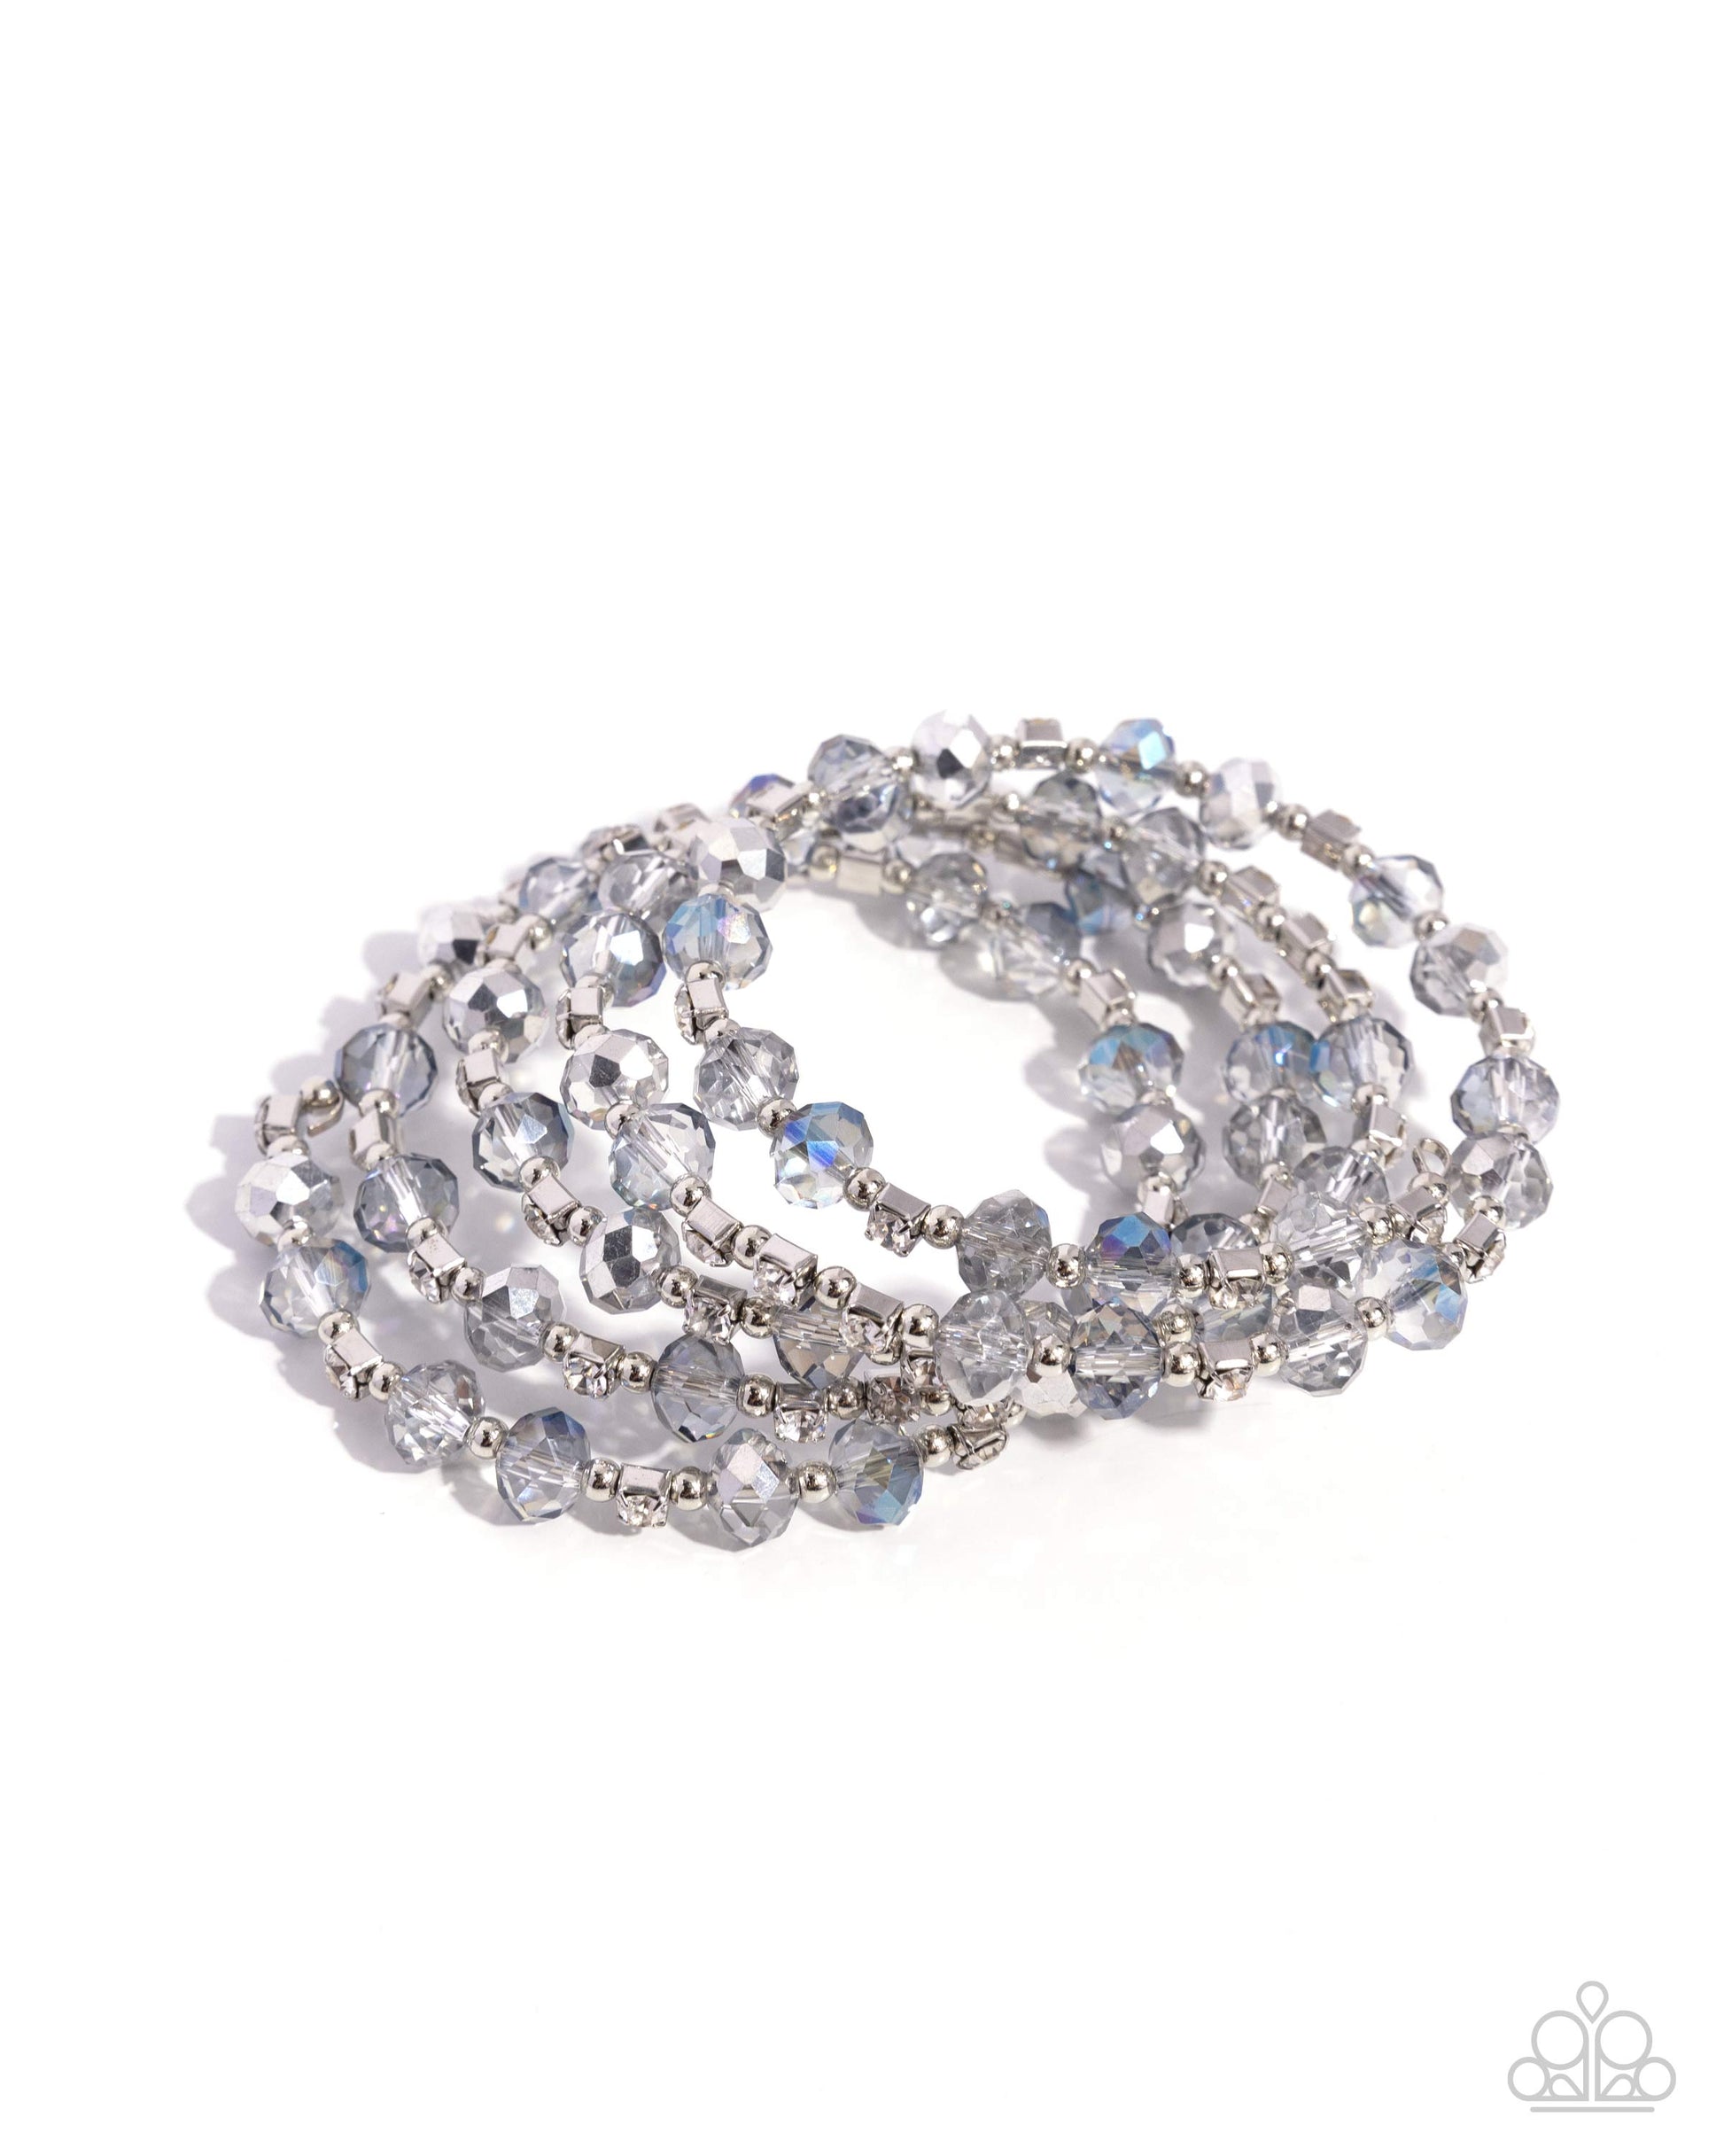 Refined Reality Silver Coil Bracelet - Paparazzi Accessories  Brushed in a UV coating, reflective faceted clear beads, clear beads, silver beads, and white rhinestones in square fittings are threaded along a coiled wire, creating a refined infinity wrap-style bracelet around the wrist.  Sold as one individual bracelet.  SKU: P9RE-SVXX-335XX